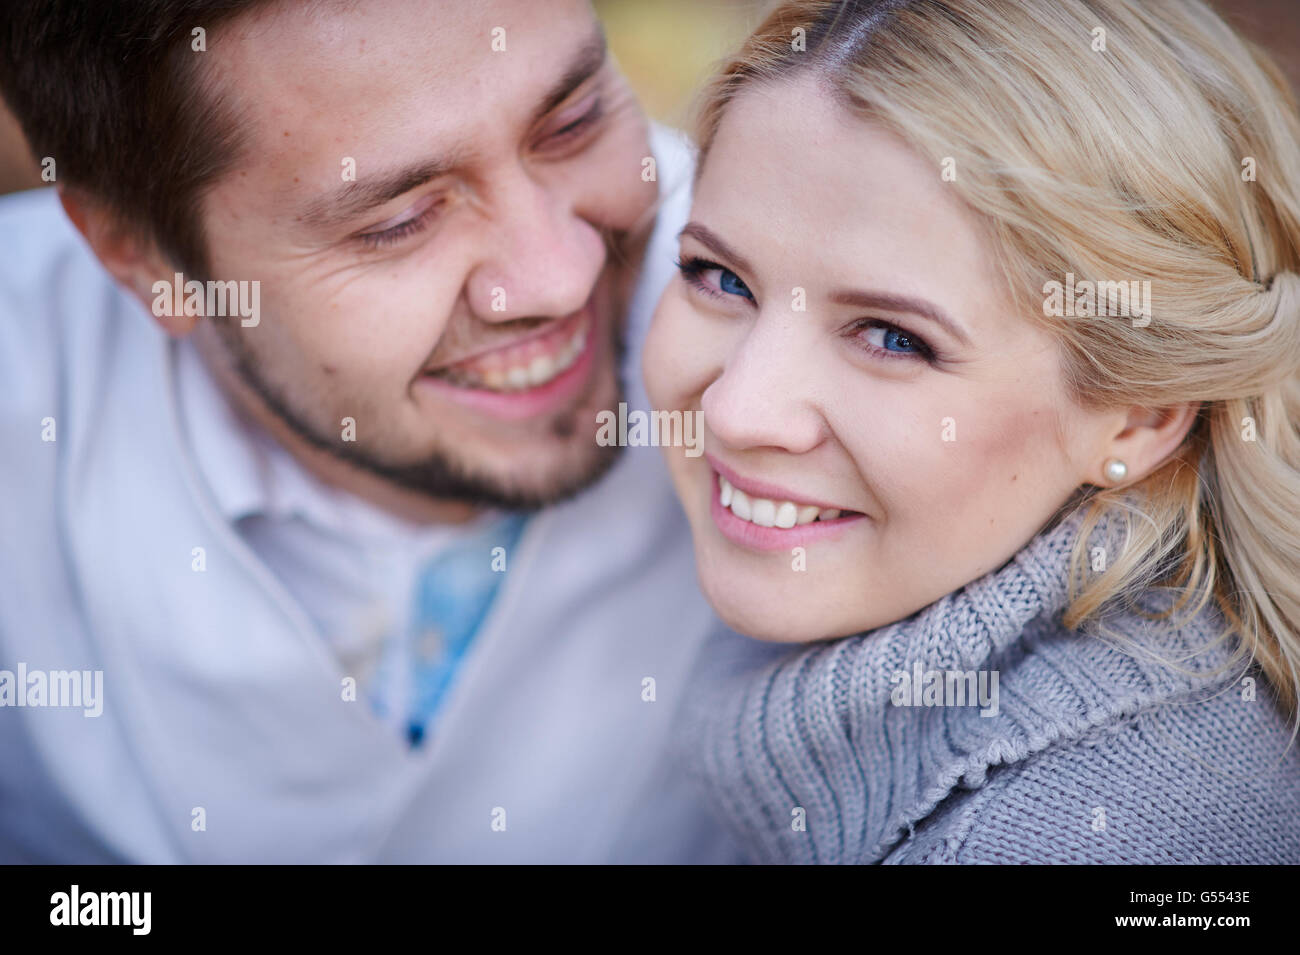 Close up portrait of happy smiling couple in love Stock Photo